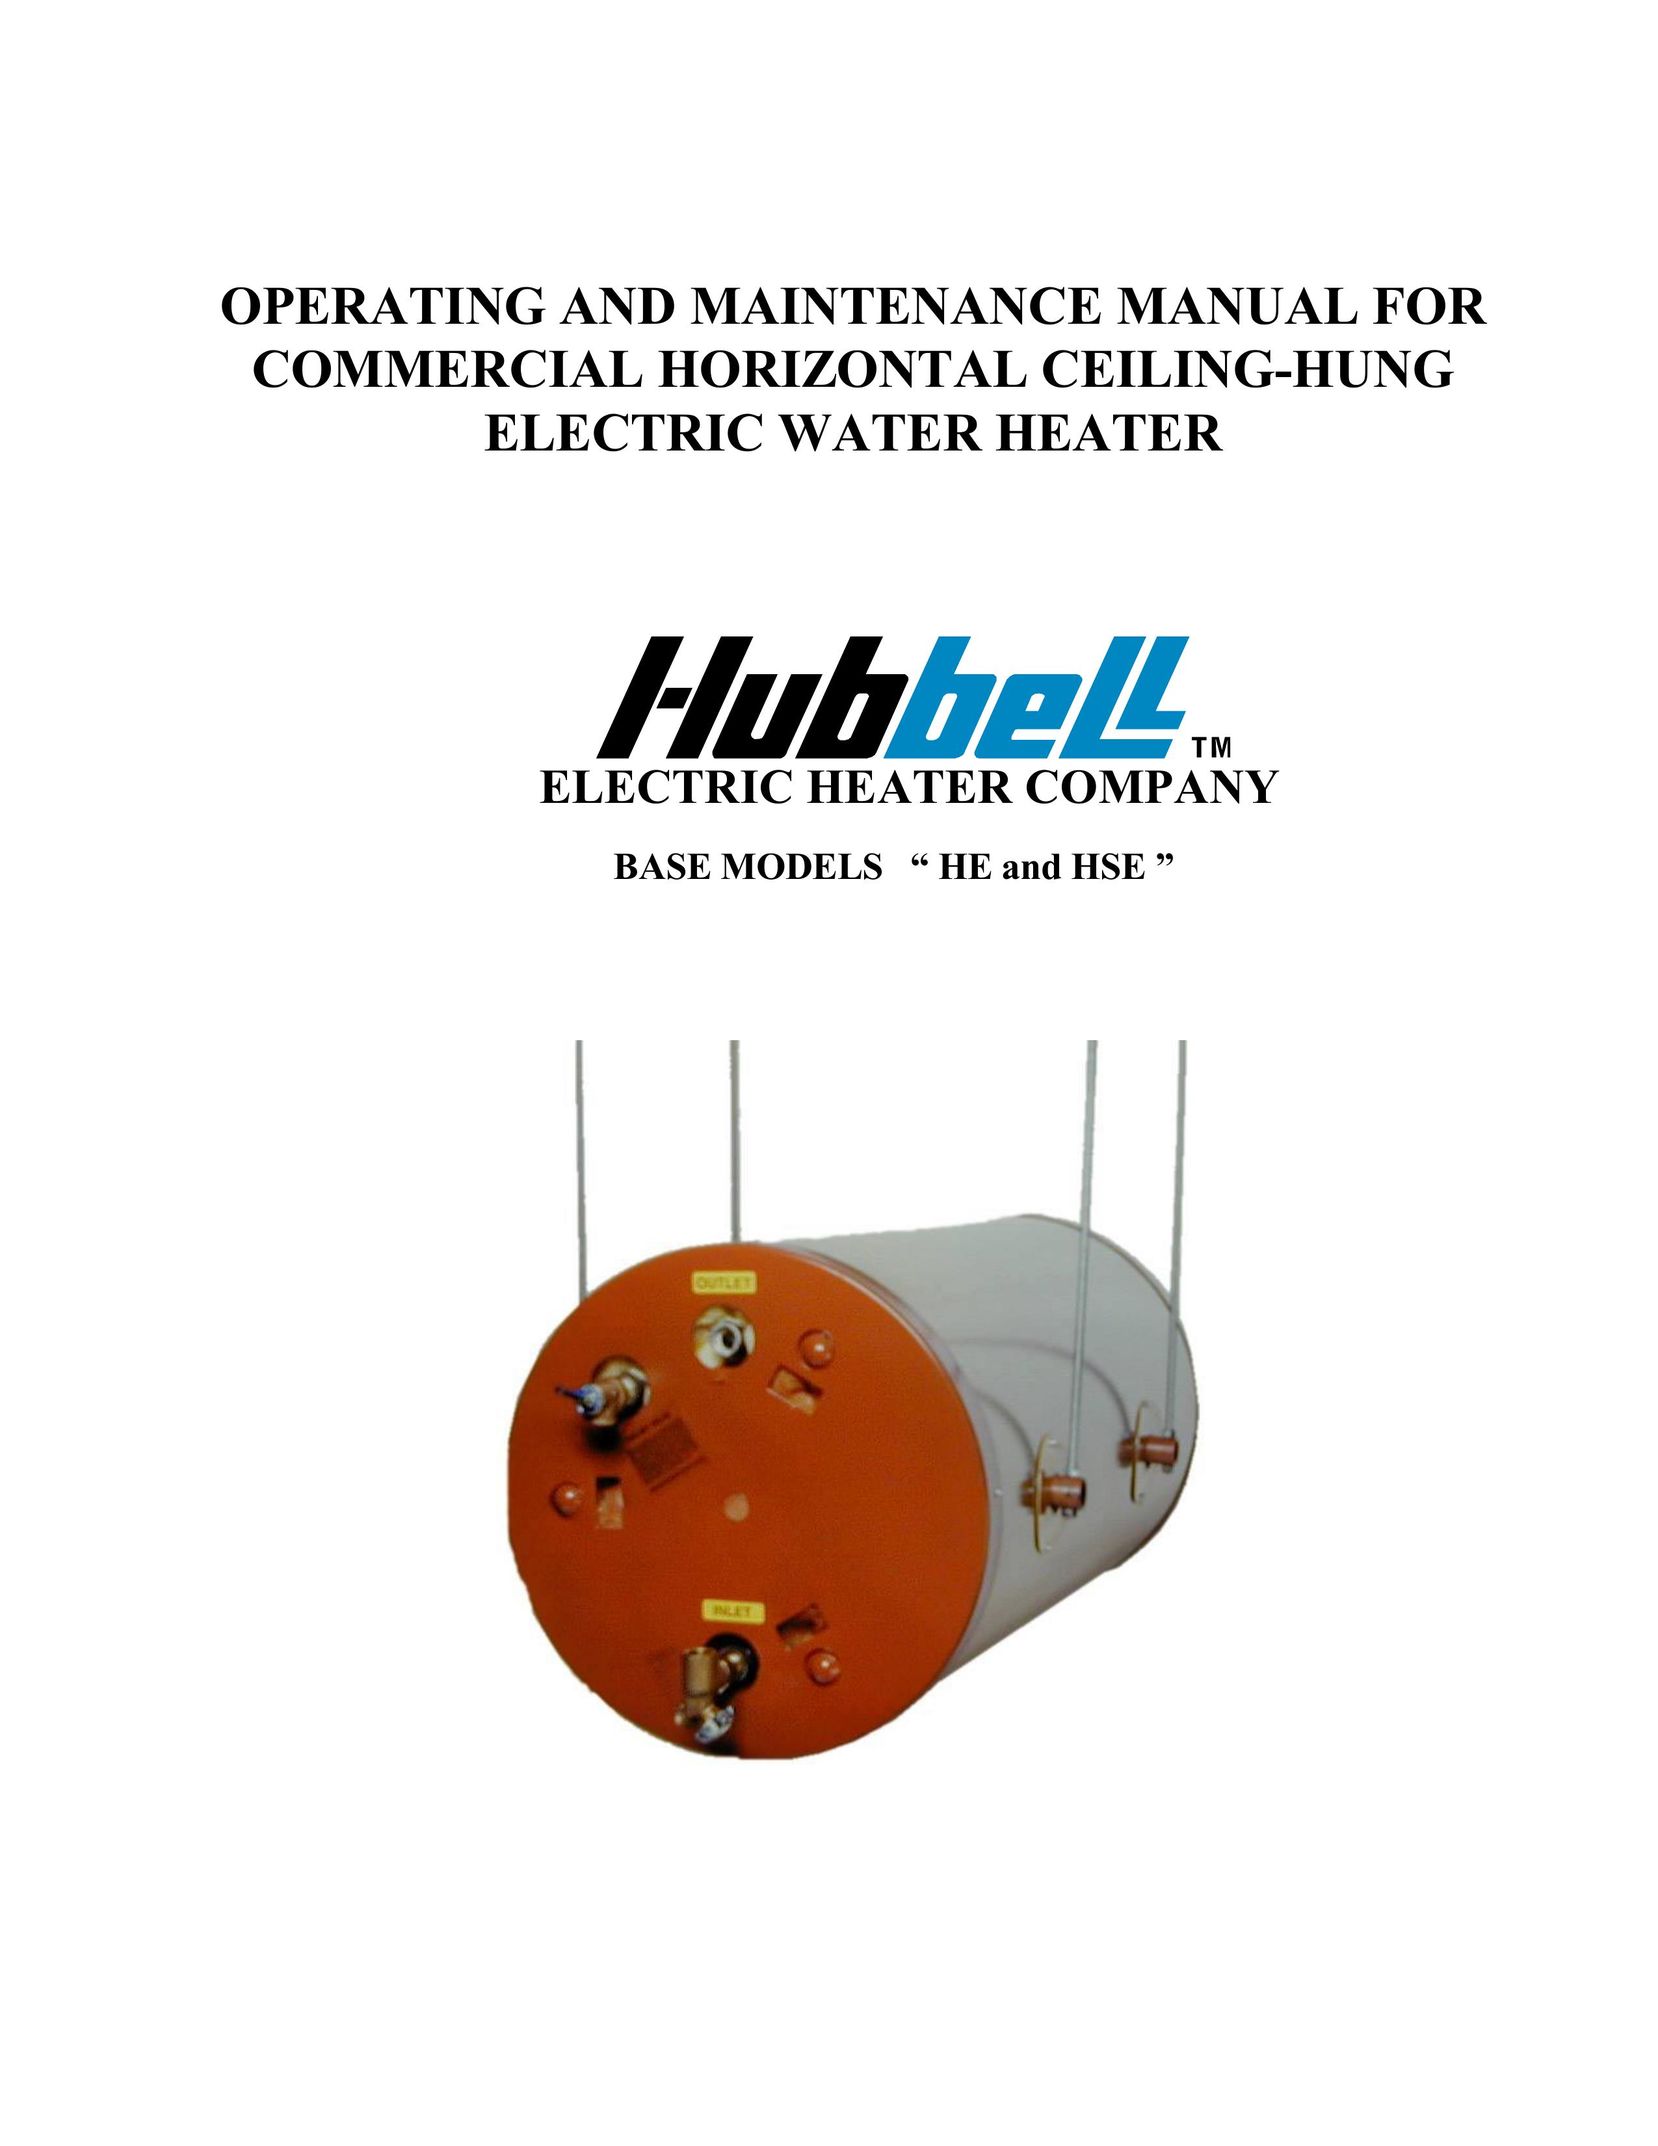 Hubbell Electric Heater Company HE Water Heater User Manual